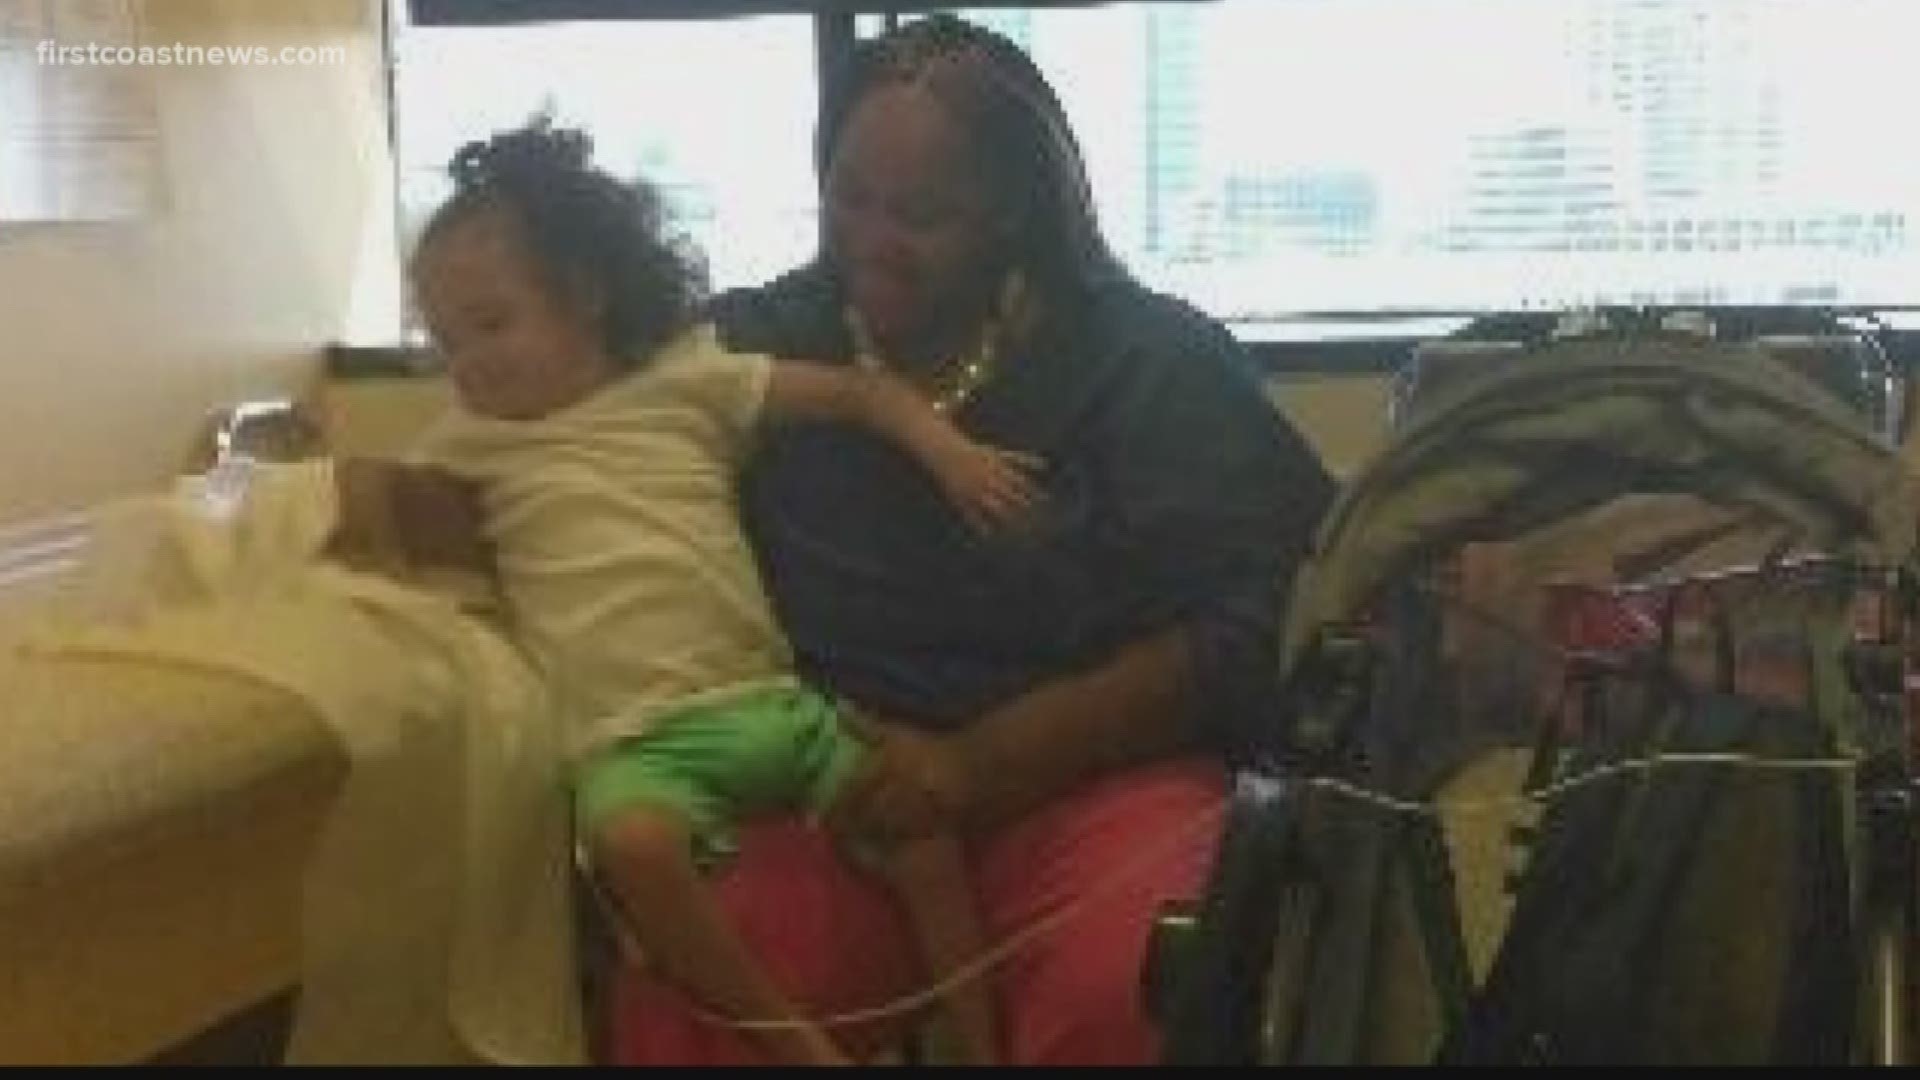 A 6-year-old girl with special needs was abandoned by her biological mother. One woman stepped up and adopted Malia right in time for Christmas. They plan to make it official during Wednesday's Adoption Ceremony at the Duval County Courthouse.